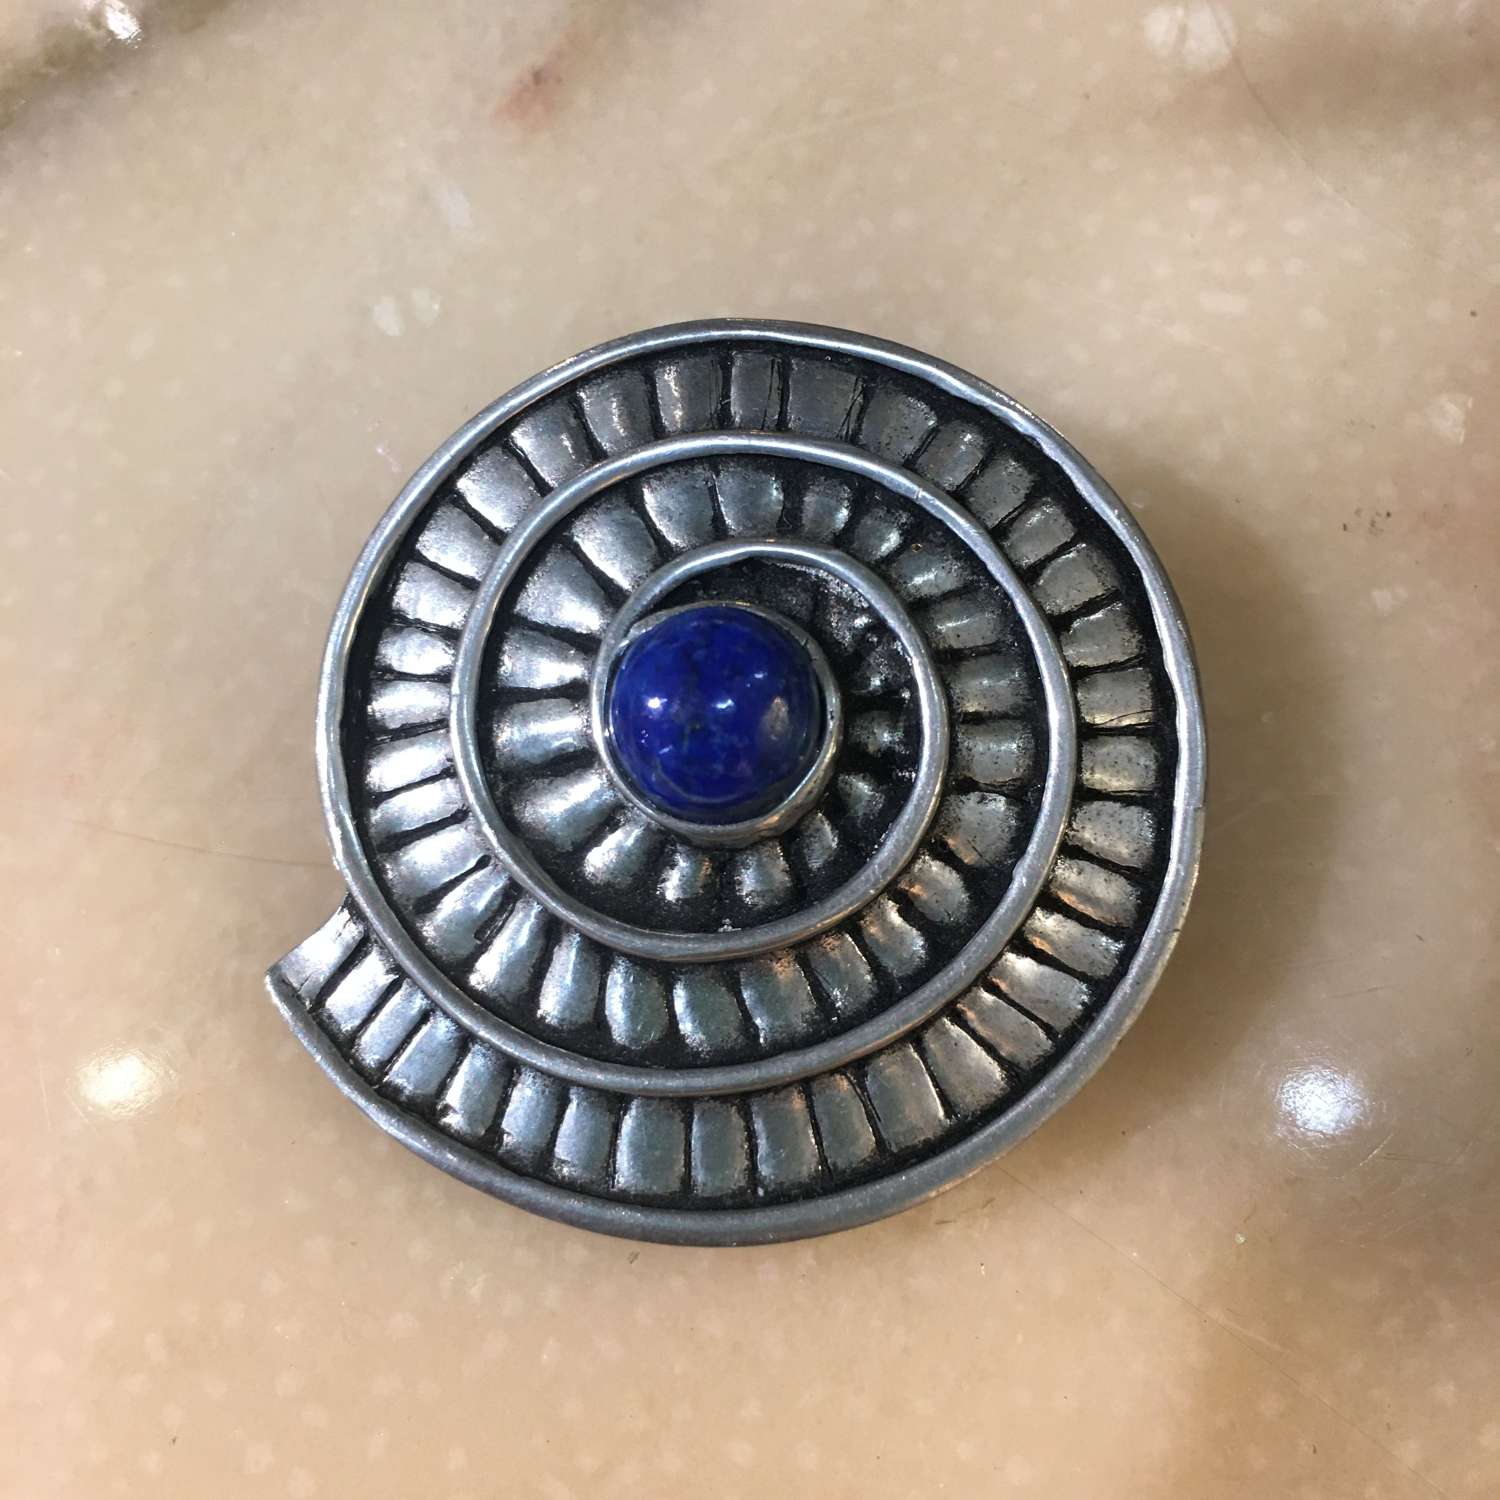 St Justin pewter and blue stone ammonite brooch